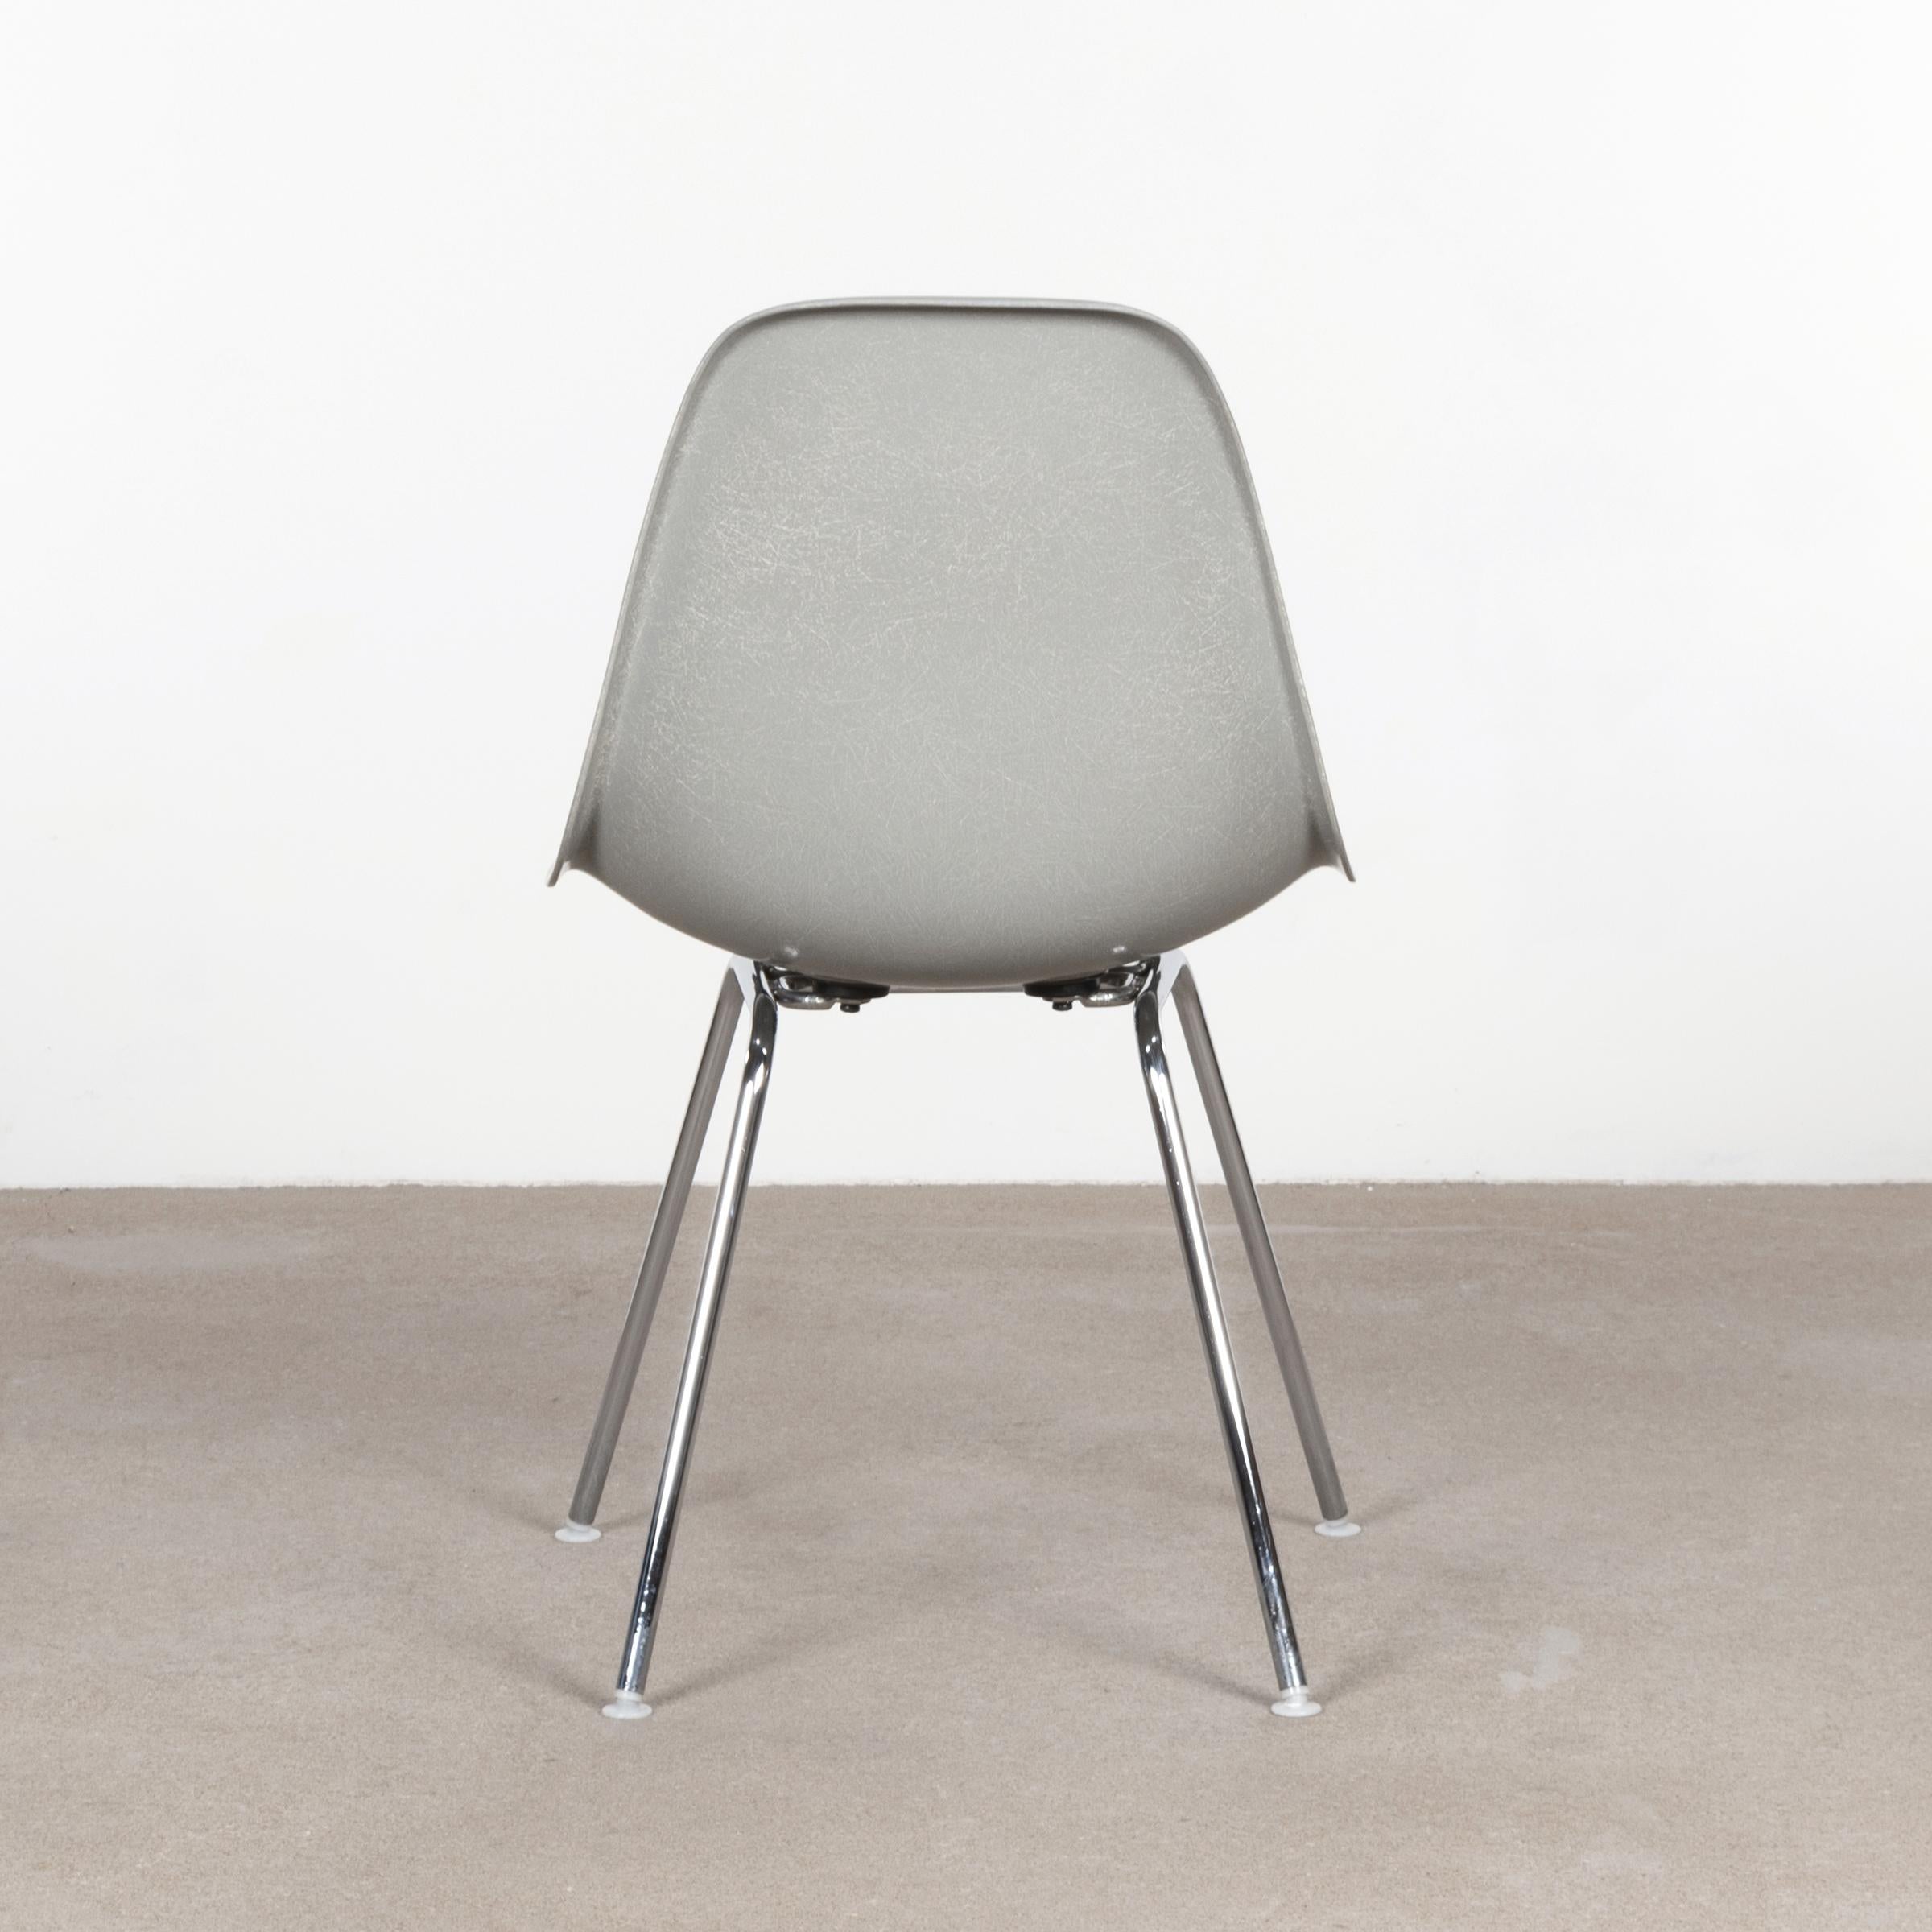 Mid-20th Century Charles and Ray Eames DSX Dining Chair Sea Foam Green Light, Vitra